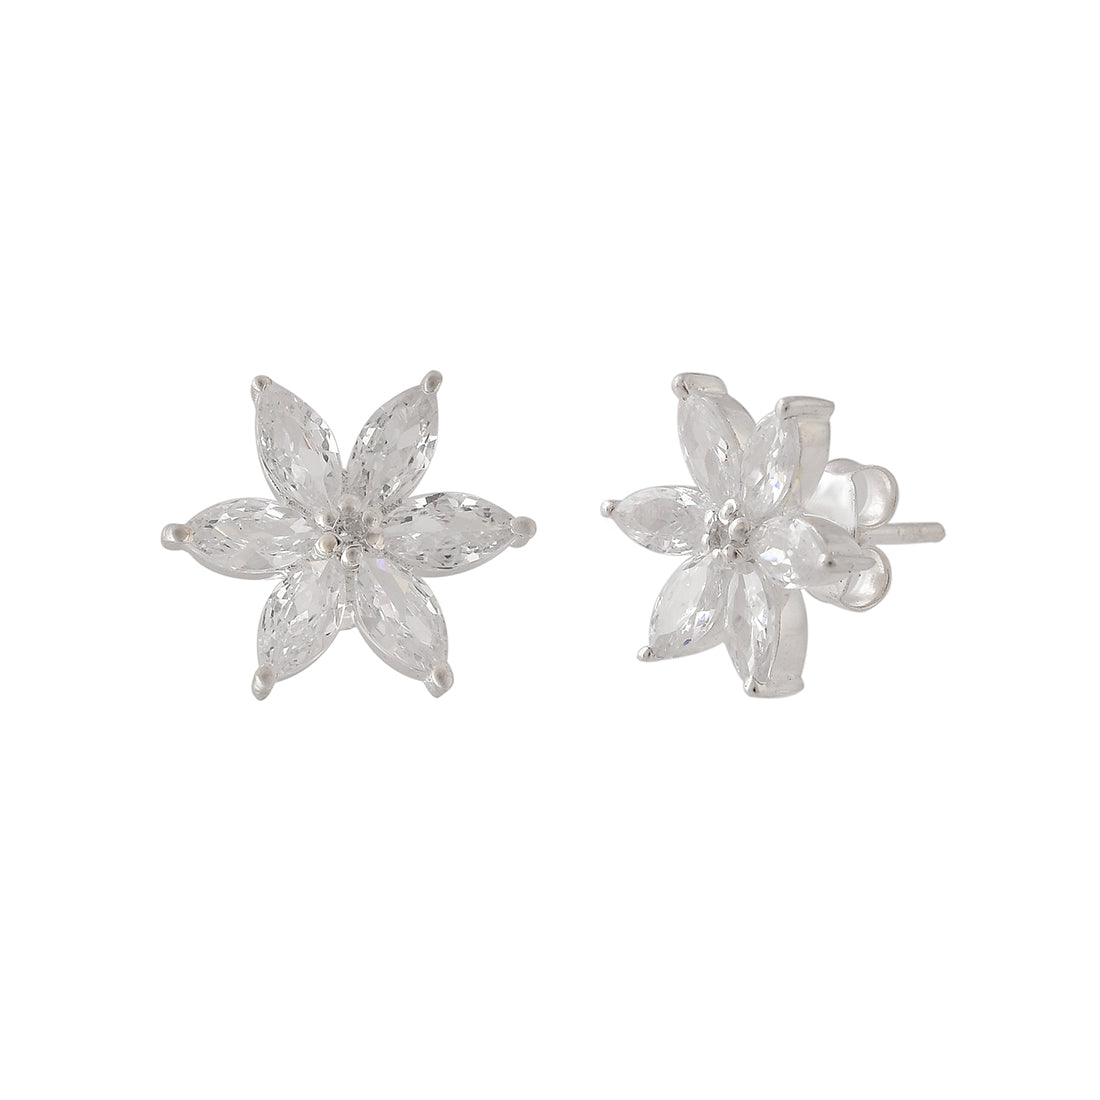 Floral Motif Silver Plated 925 Sterling Silver Earrings